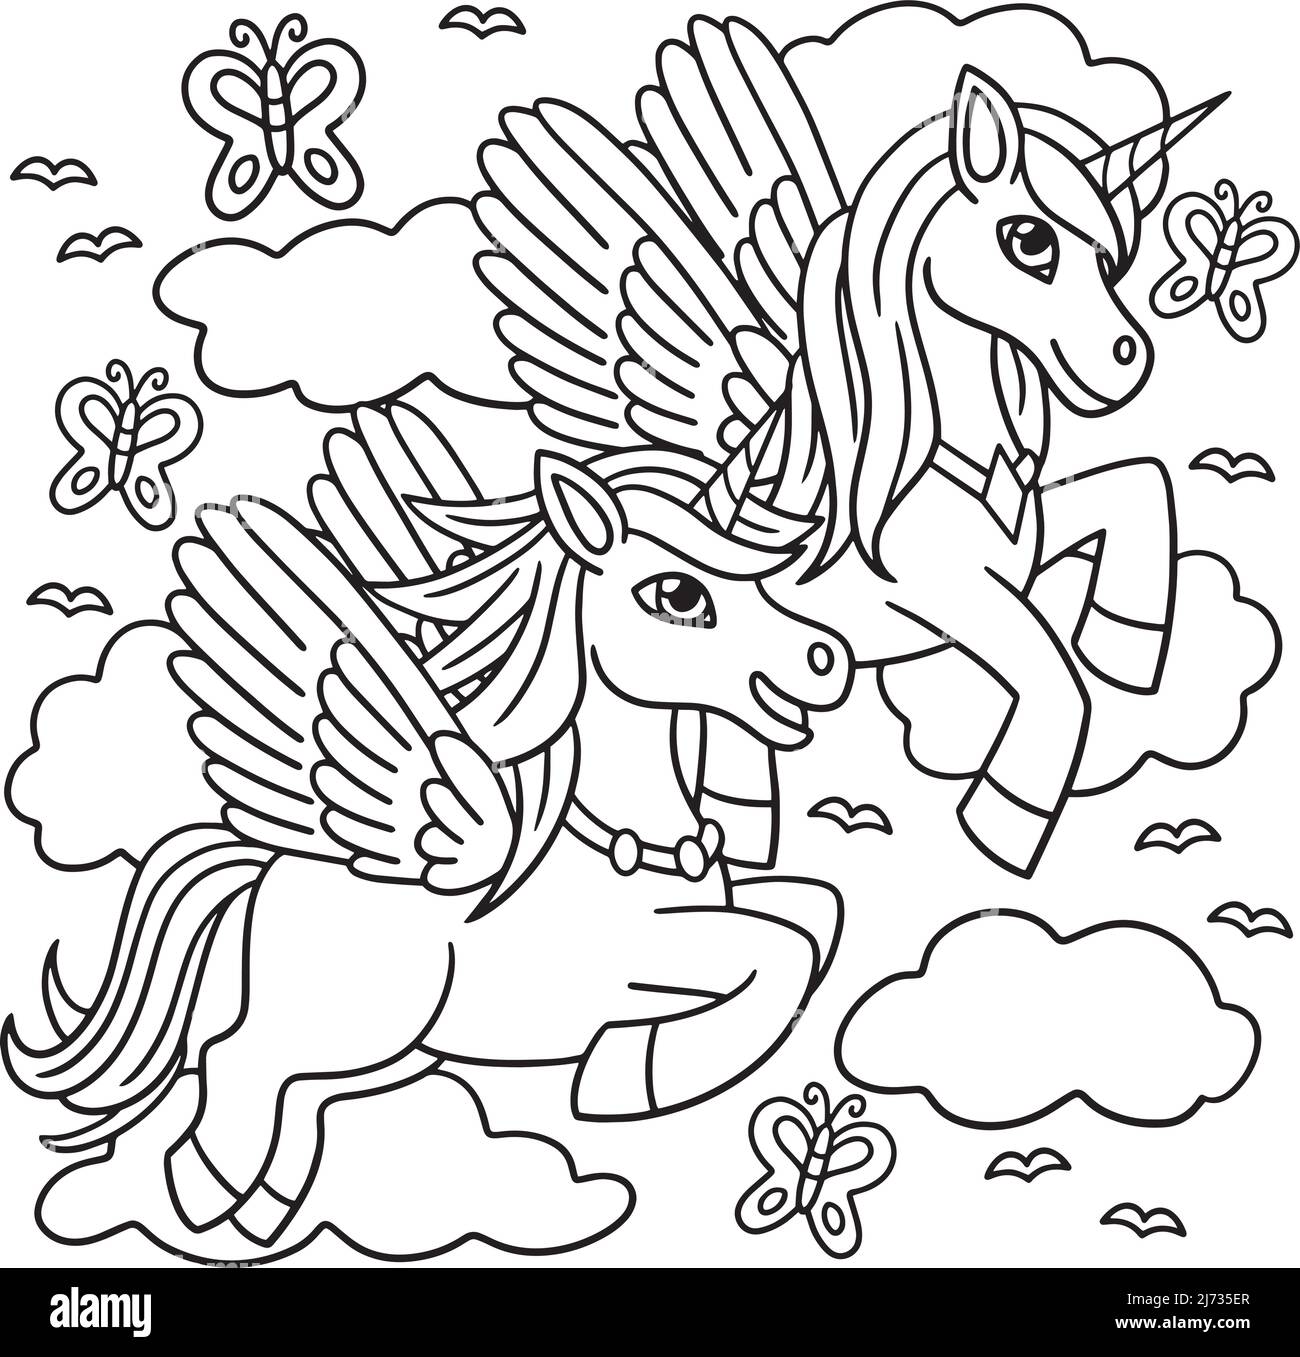 Flying Unicorns Coloring Page for Kids Stock Vector